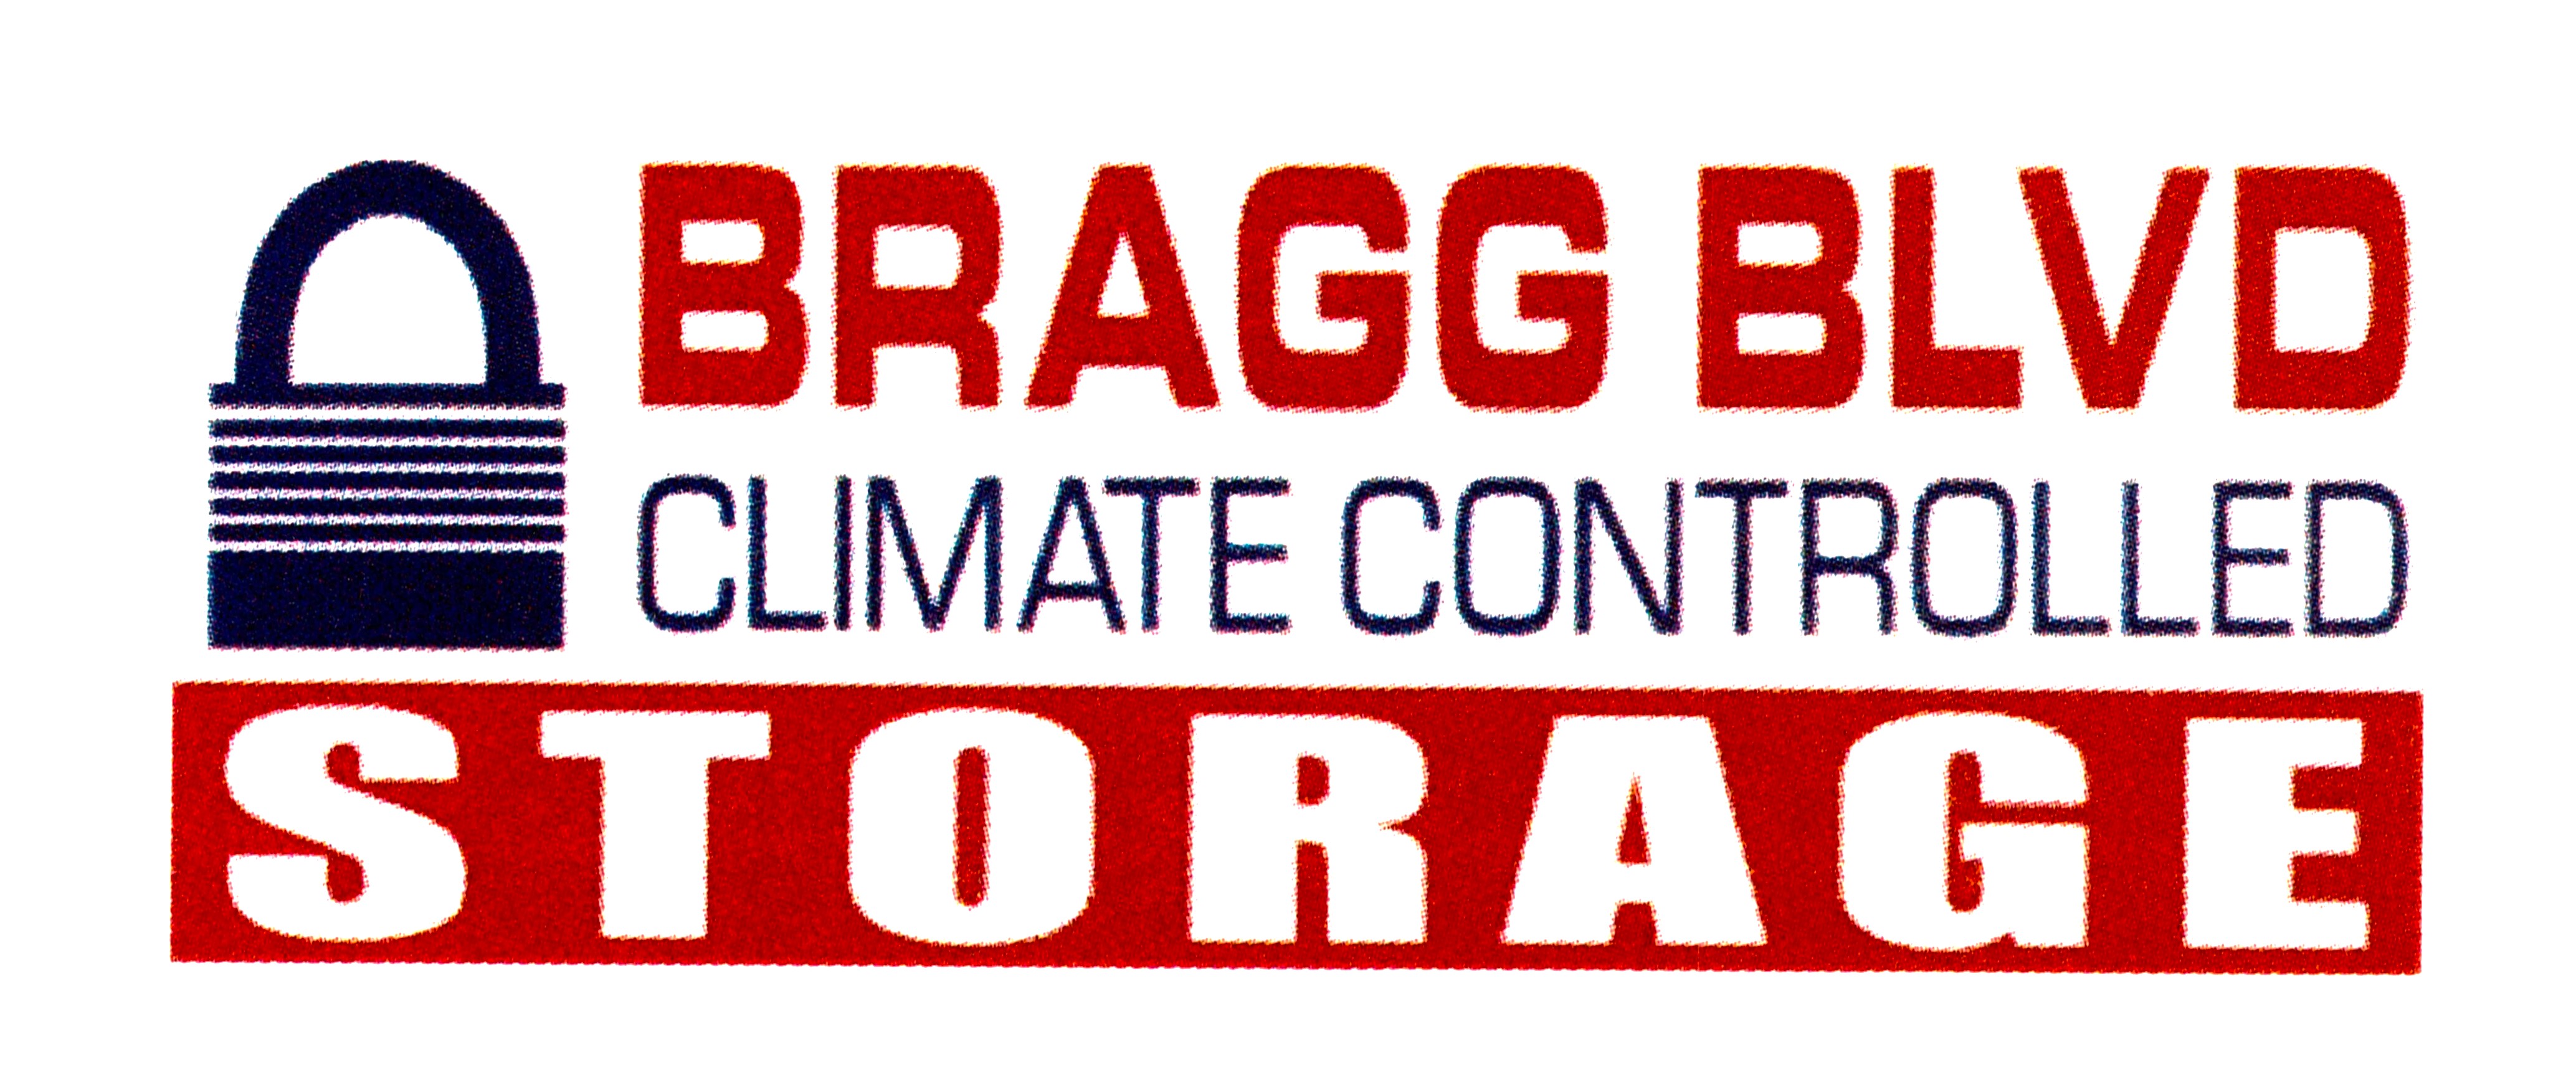 Bragg Blvd. Climate Controlled Storage in Fayetteville, NC